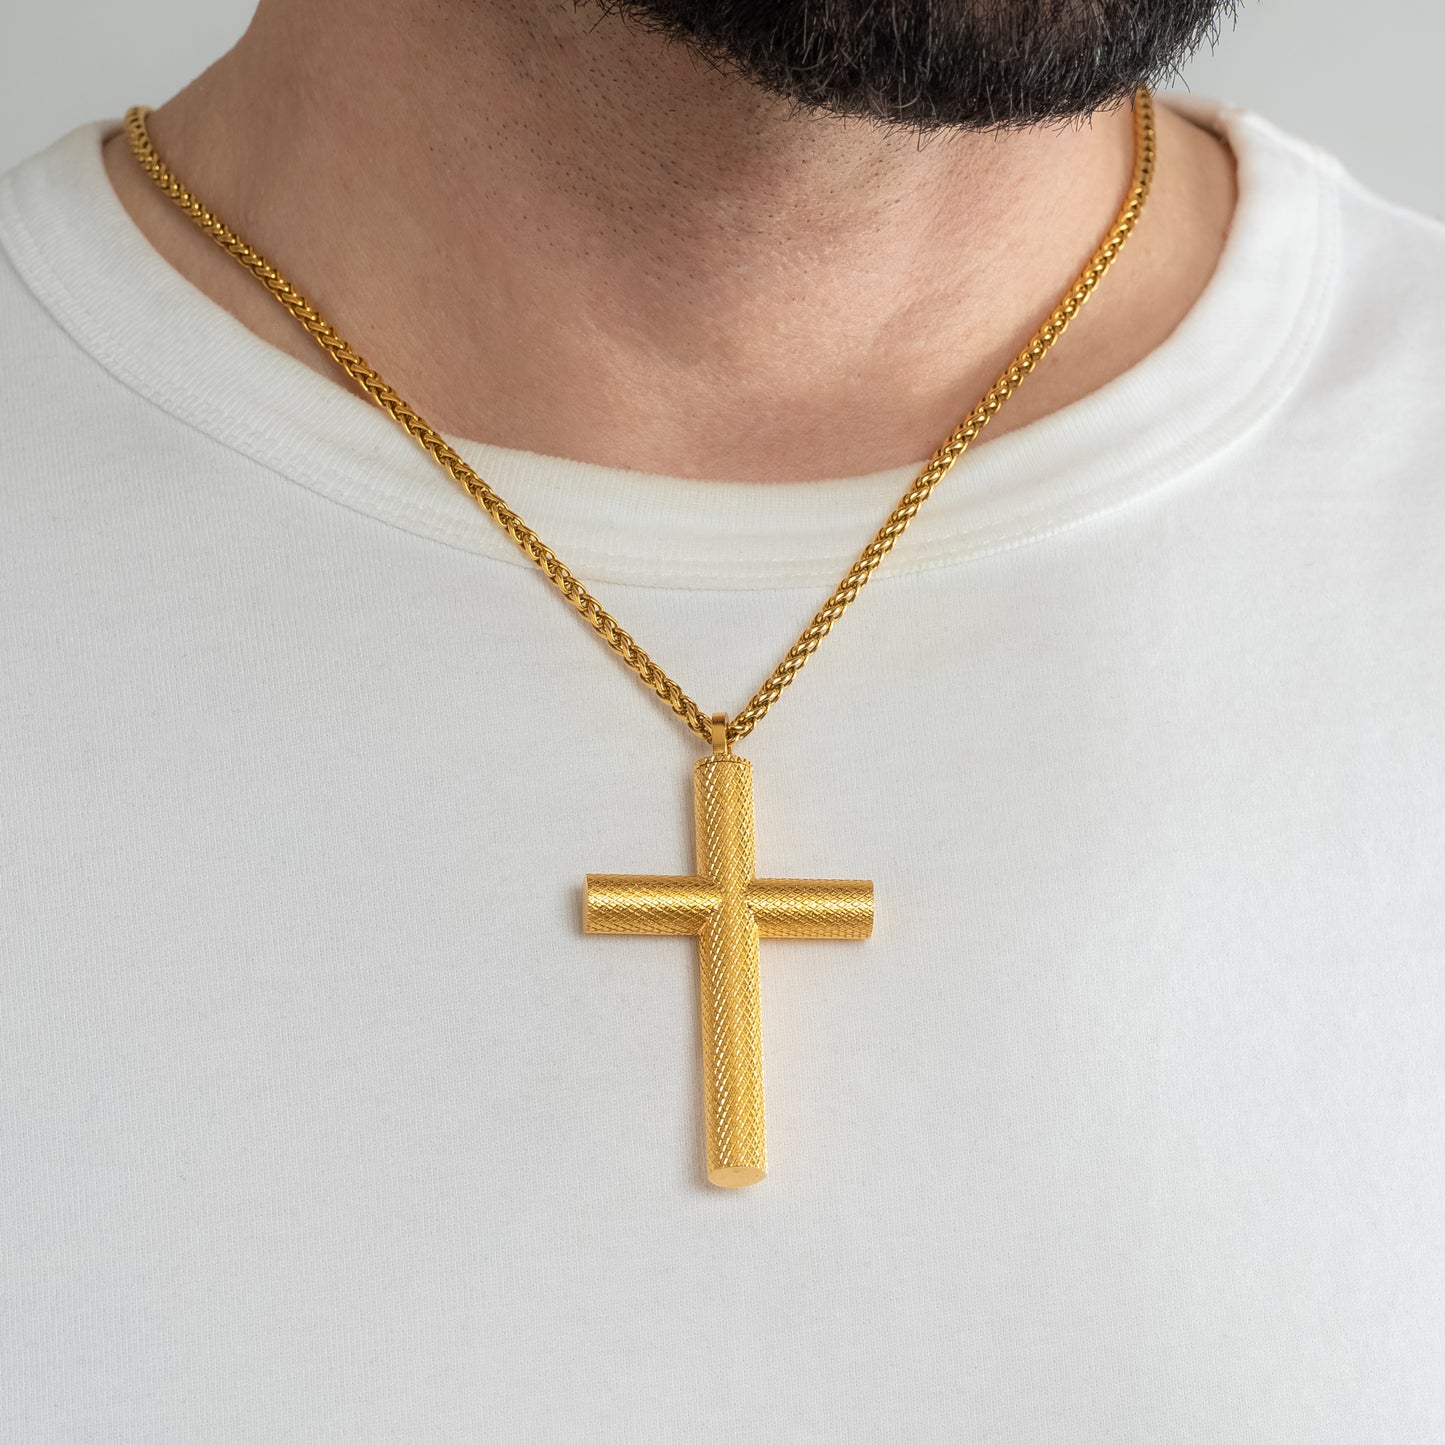 A male model in a white t-shirt wearing a Bison Cross Gold Self-fill Pendant with a 3mm Gold Spiga chain 22 inches. Close-up image of the non-tarnish trending religious men's necklace.